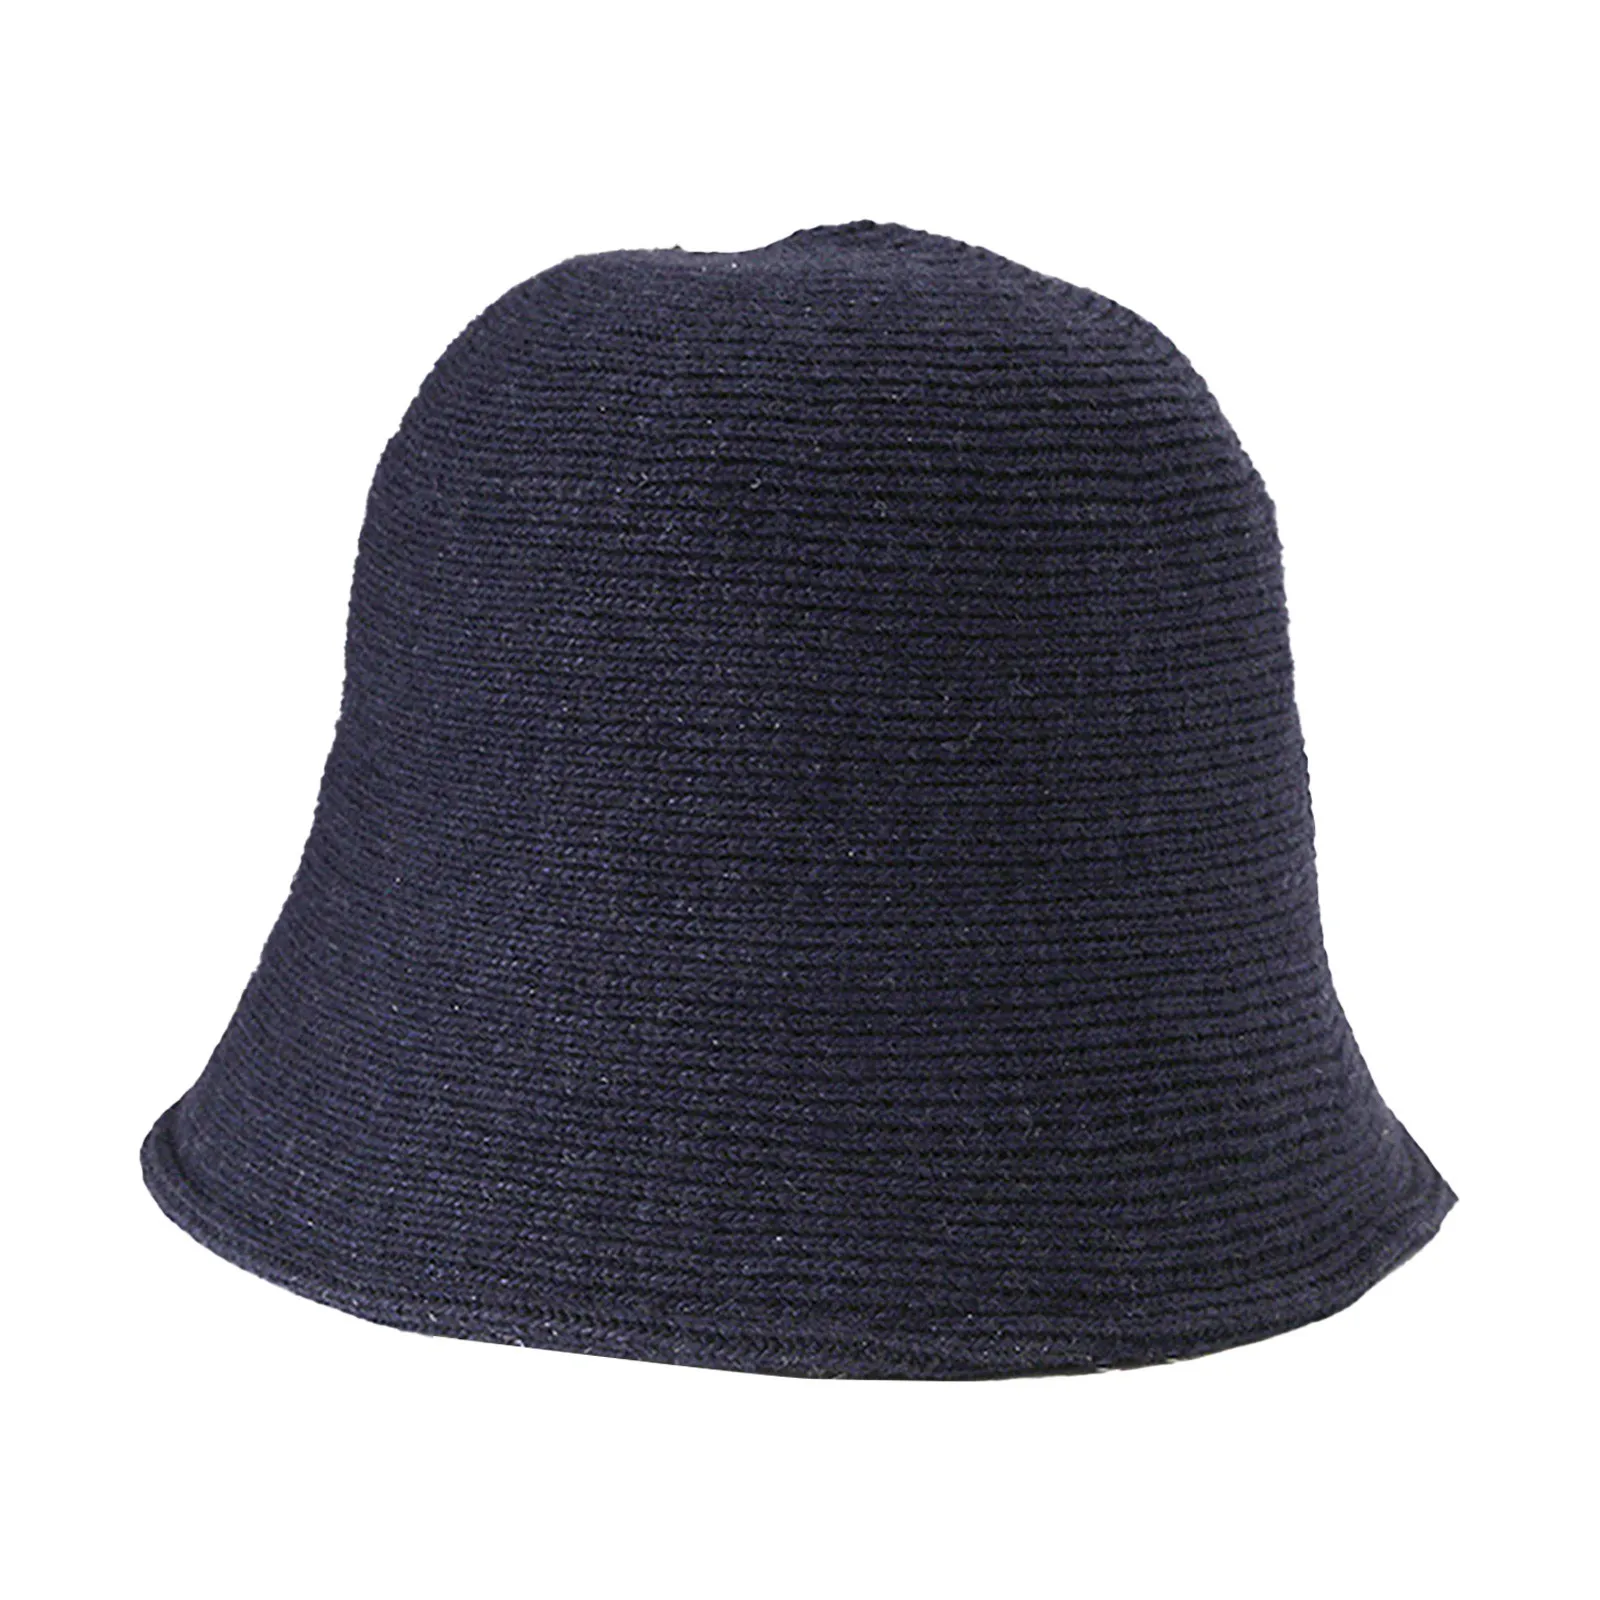 2022 Weave New Knitted Bucket Hats Hat Female Fashion Solid Color Wild Painter Japanese Fashion Cute Girls Hat Wool Women's Caps cute bucket hats